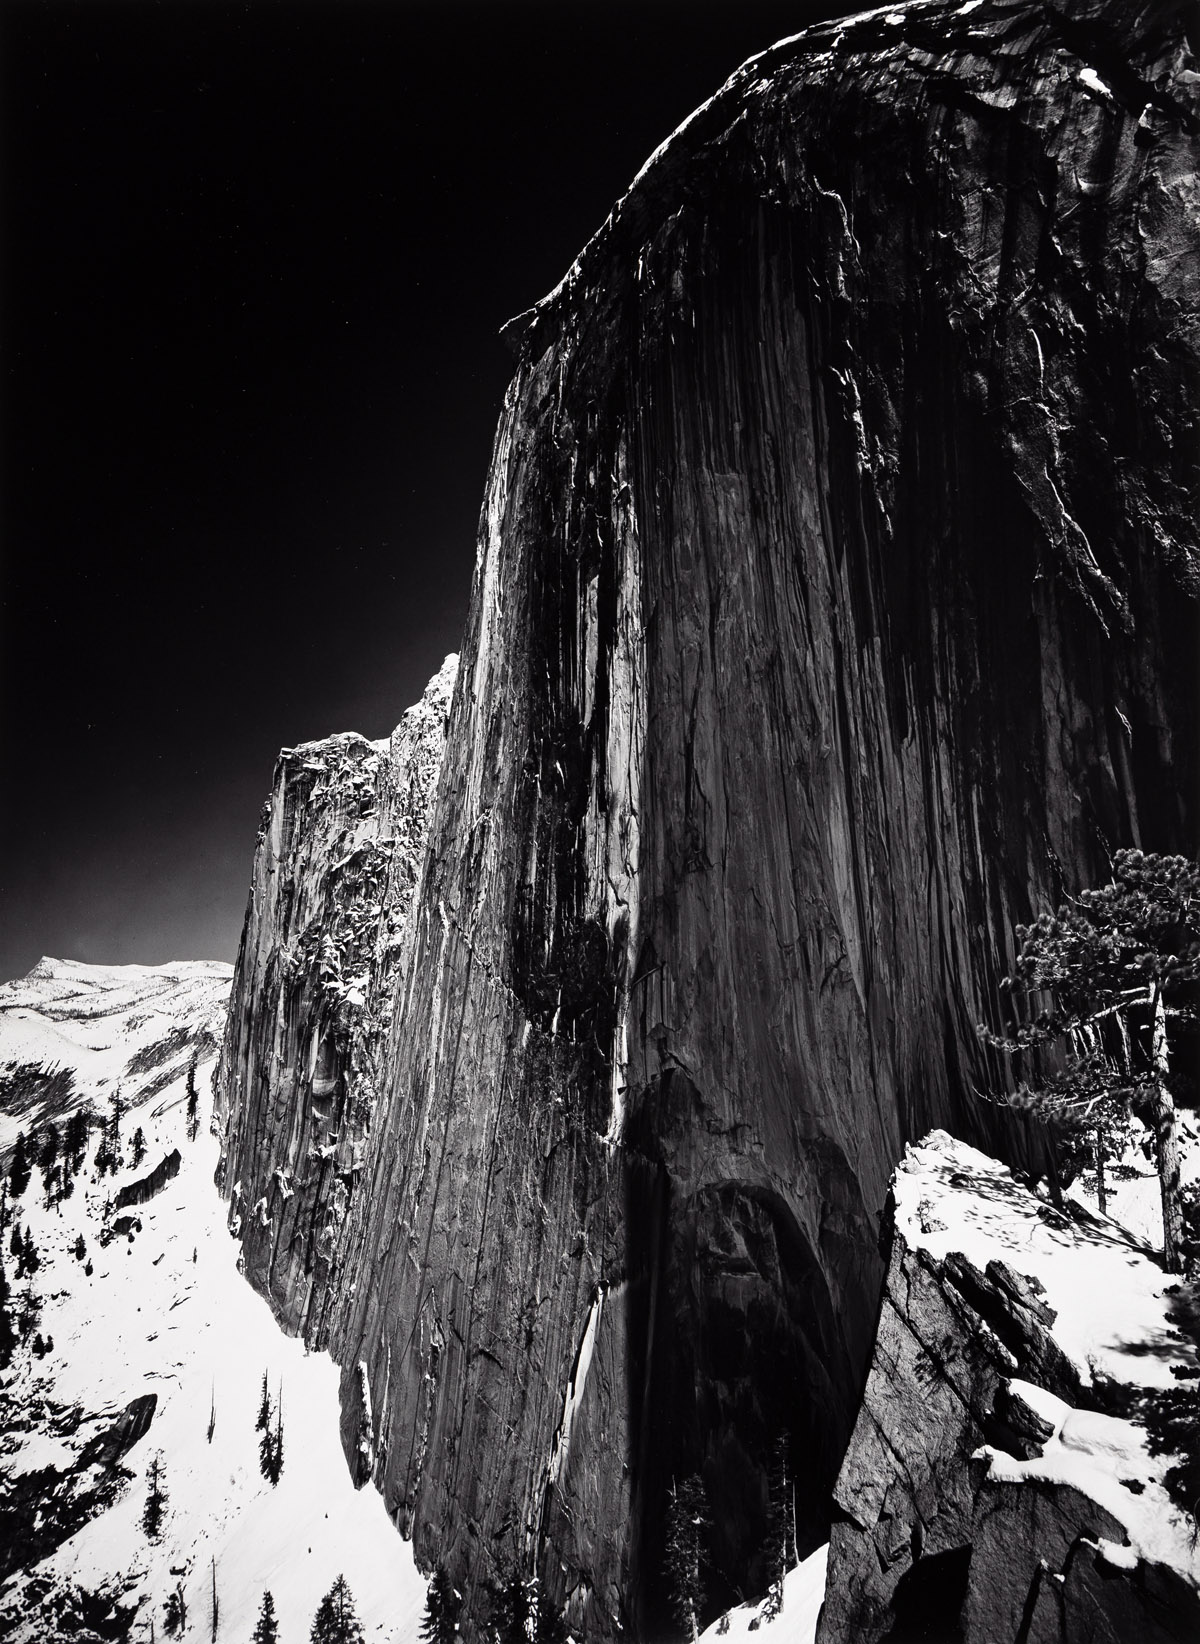 ANSEL ADAMS (1902-1984) Monolith, the Face of Half Dome, Yosemite National Park.